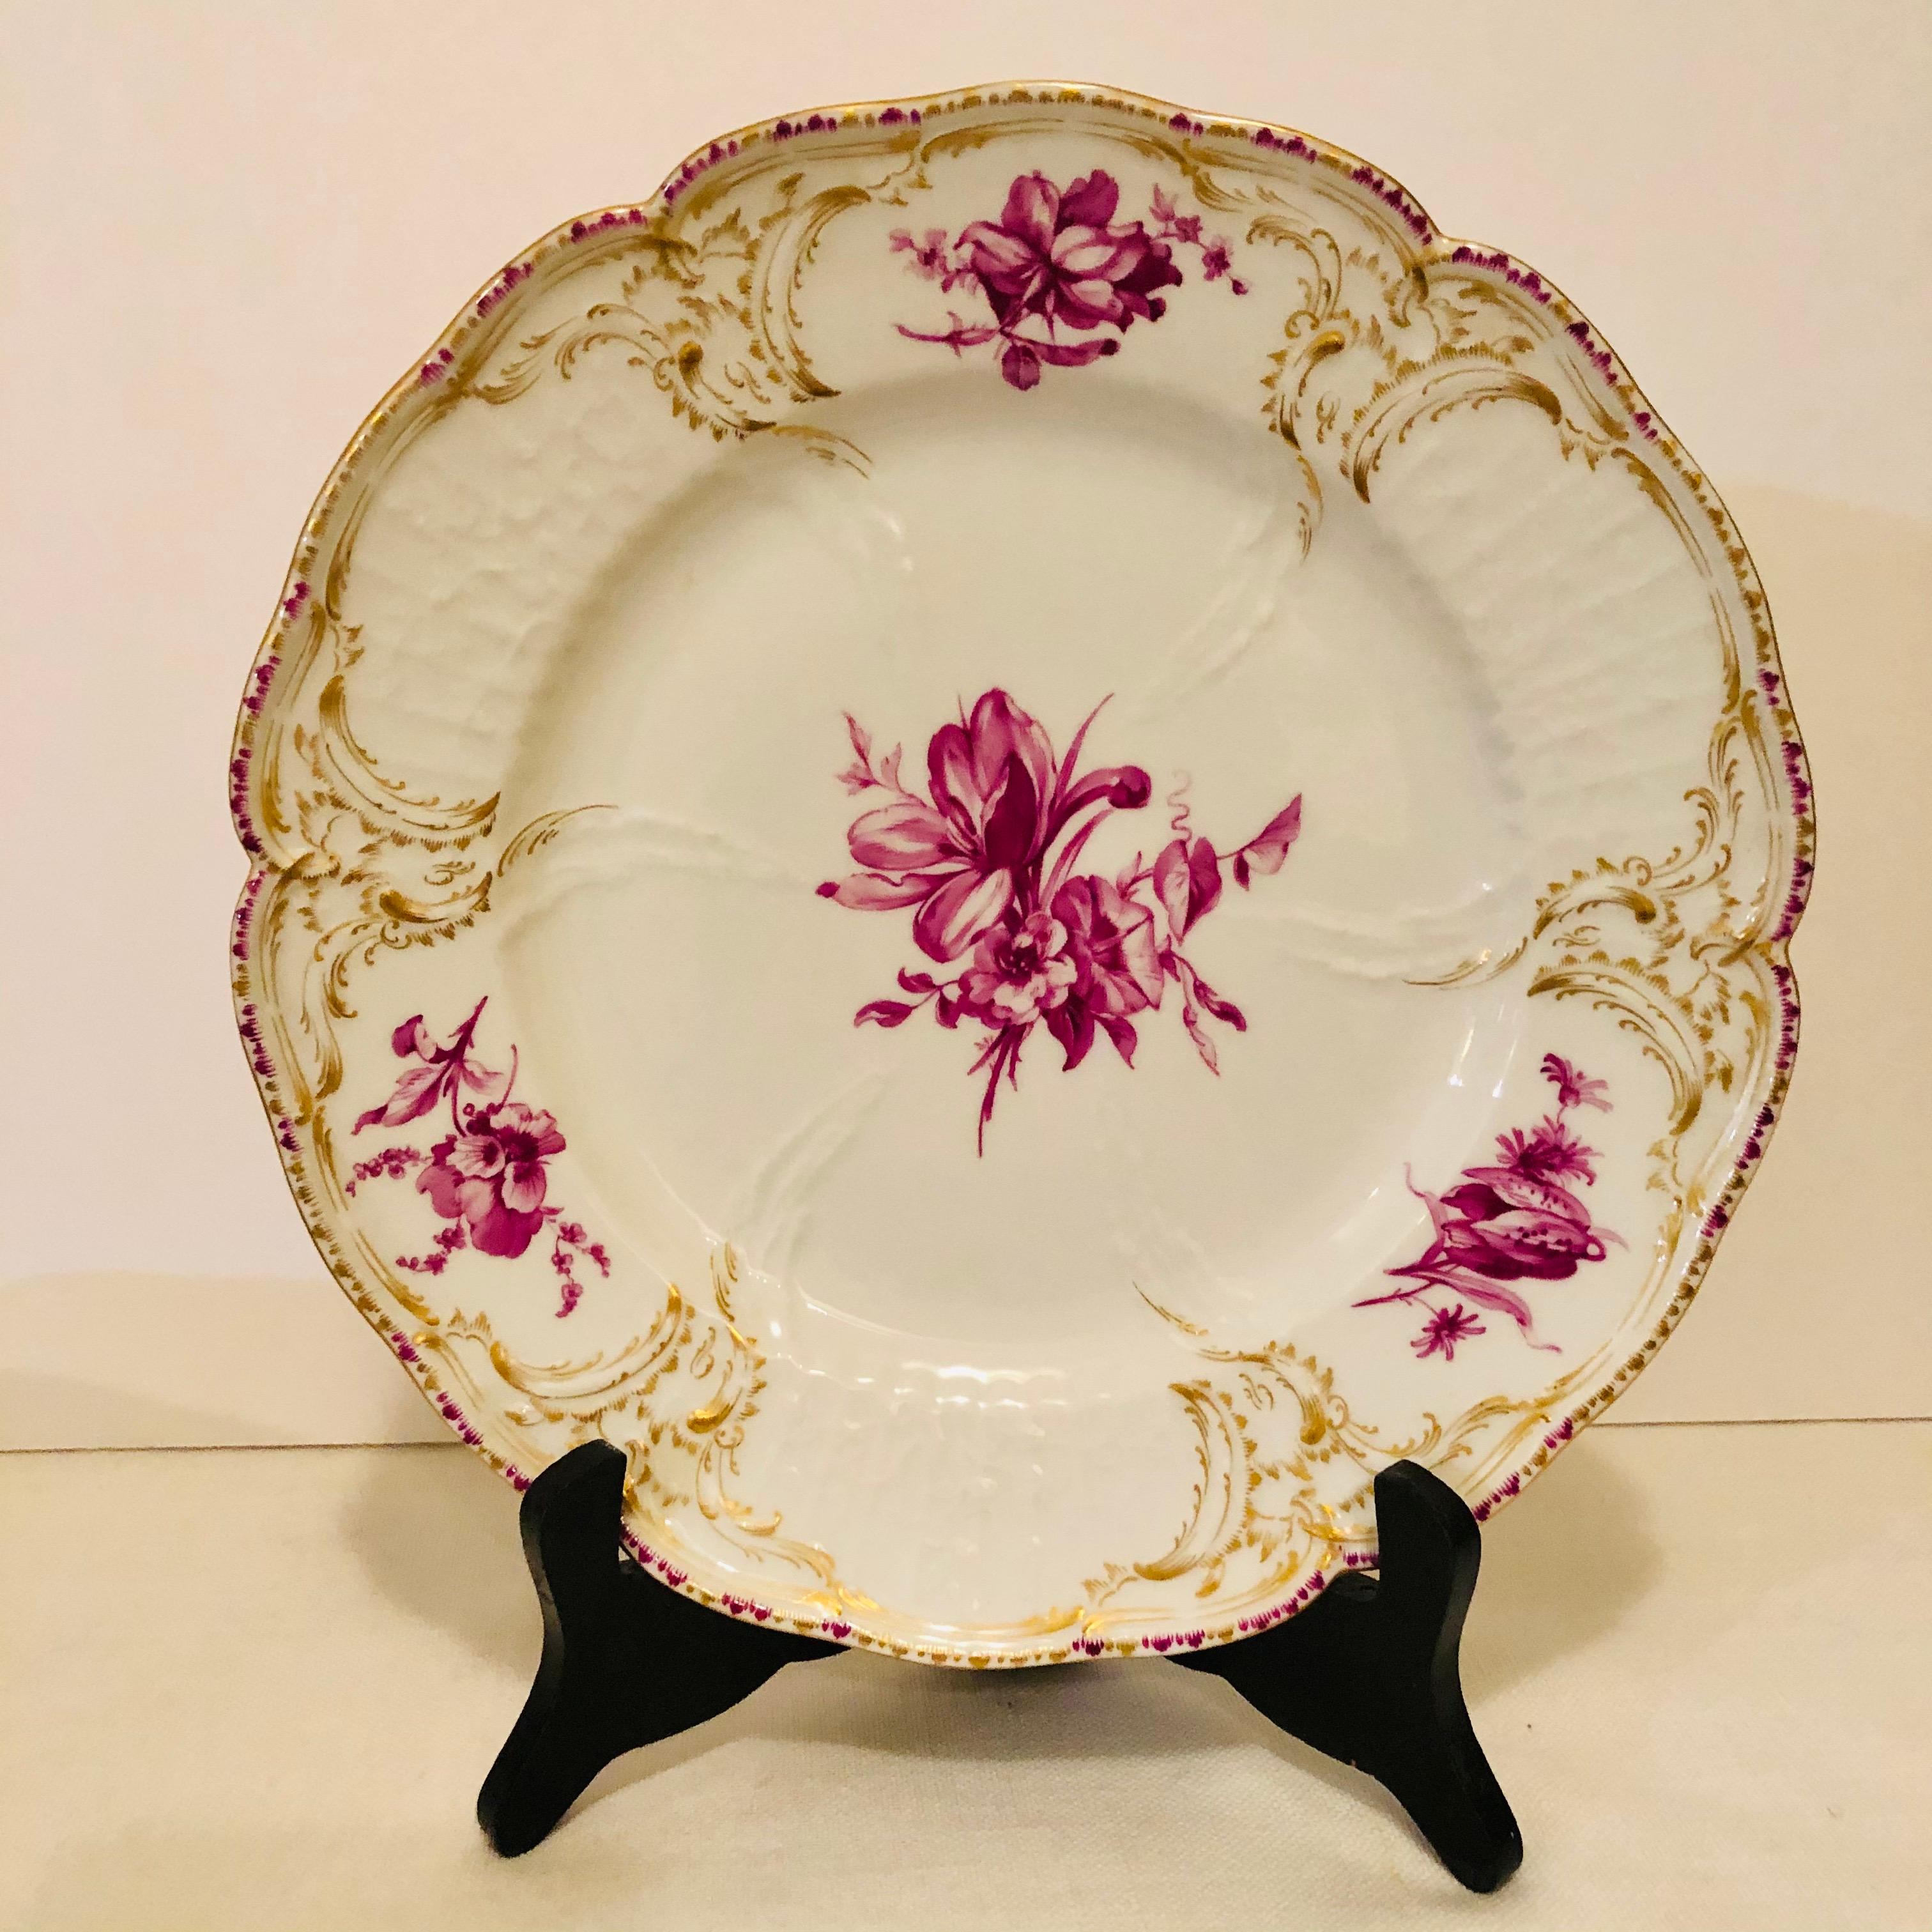 Twelve KPM Dinner Plates Each Painted with a Different Puce Flower Bouquet For Sale 6